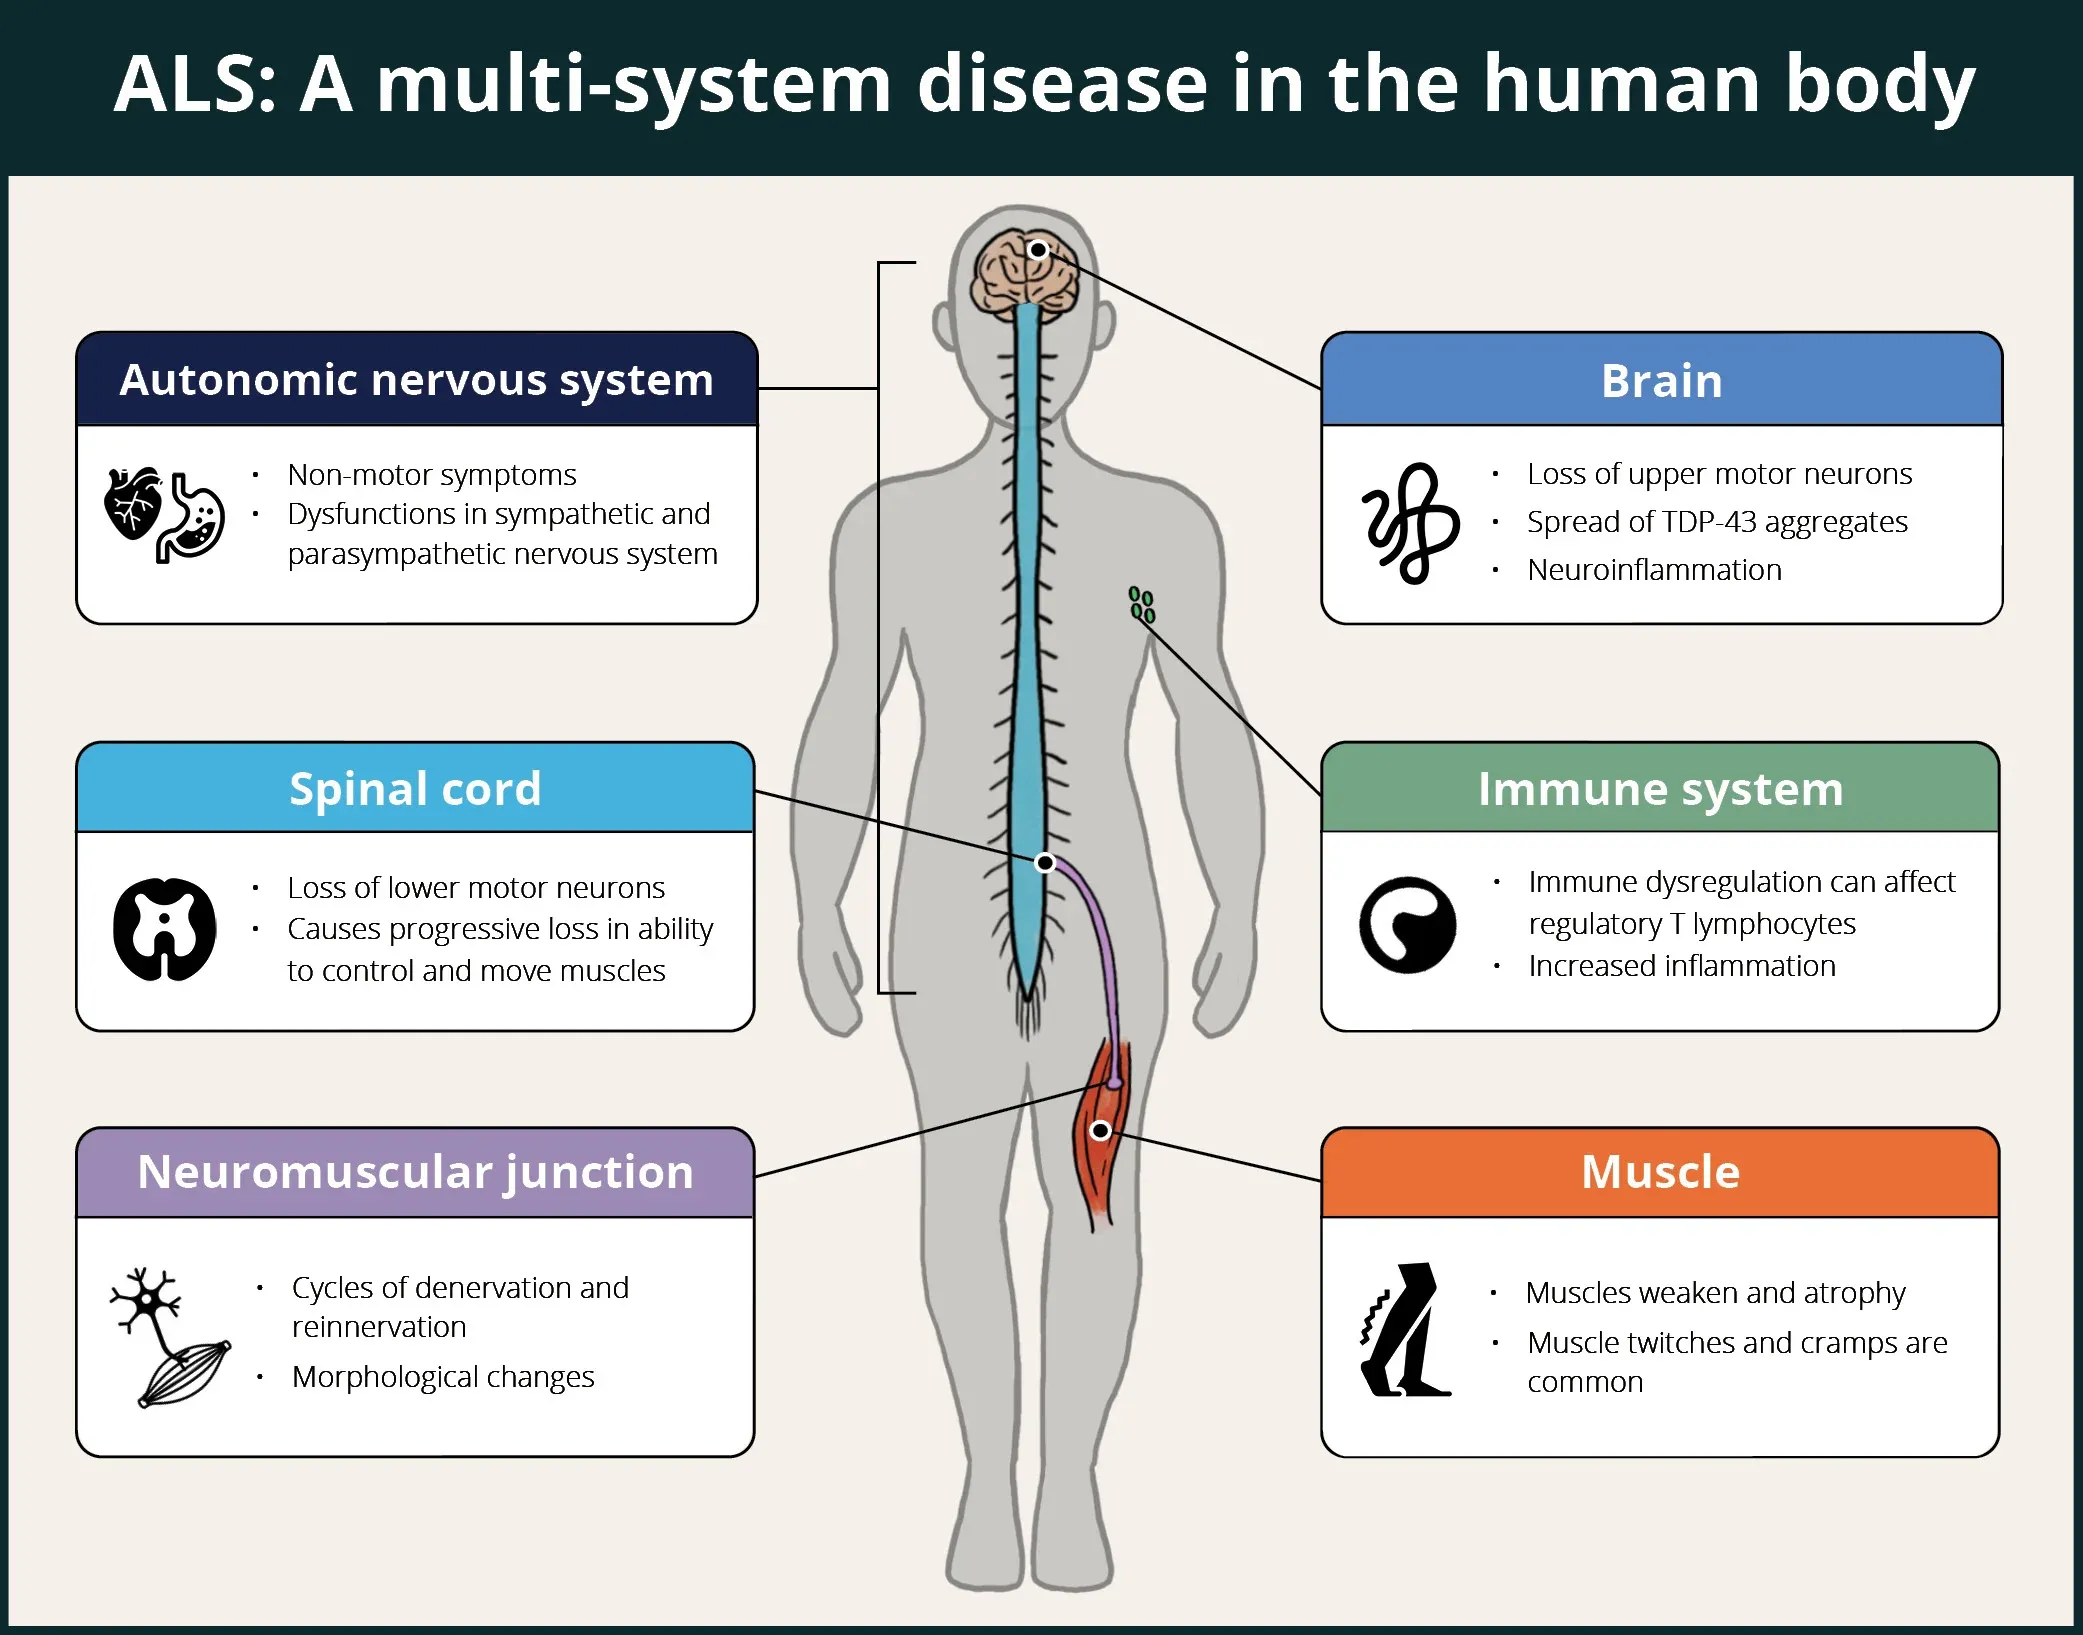 Multi-system effects of ALS on the human body